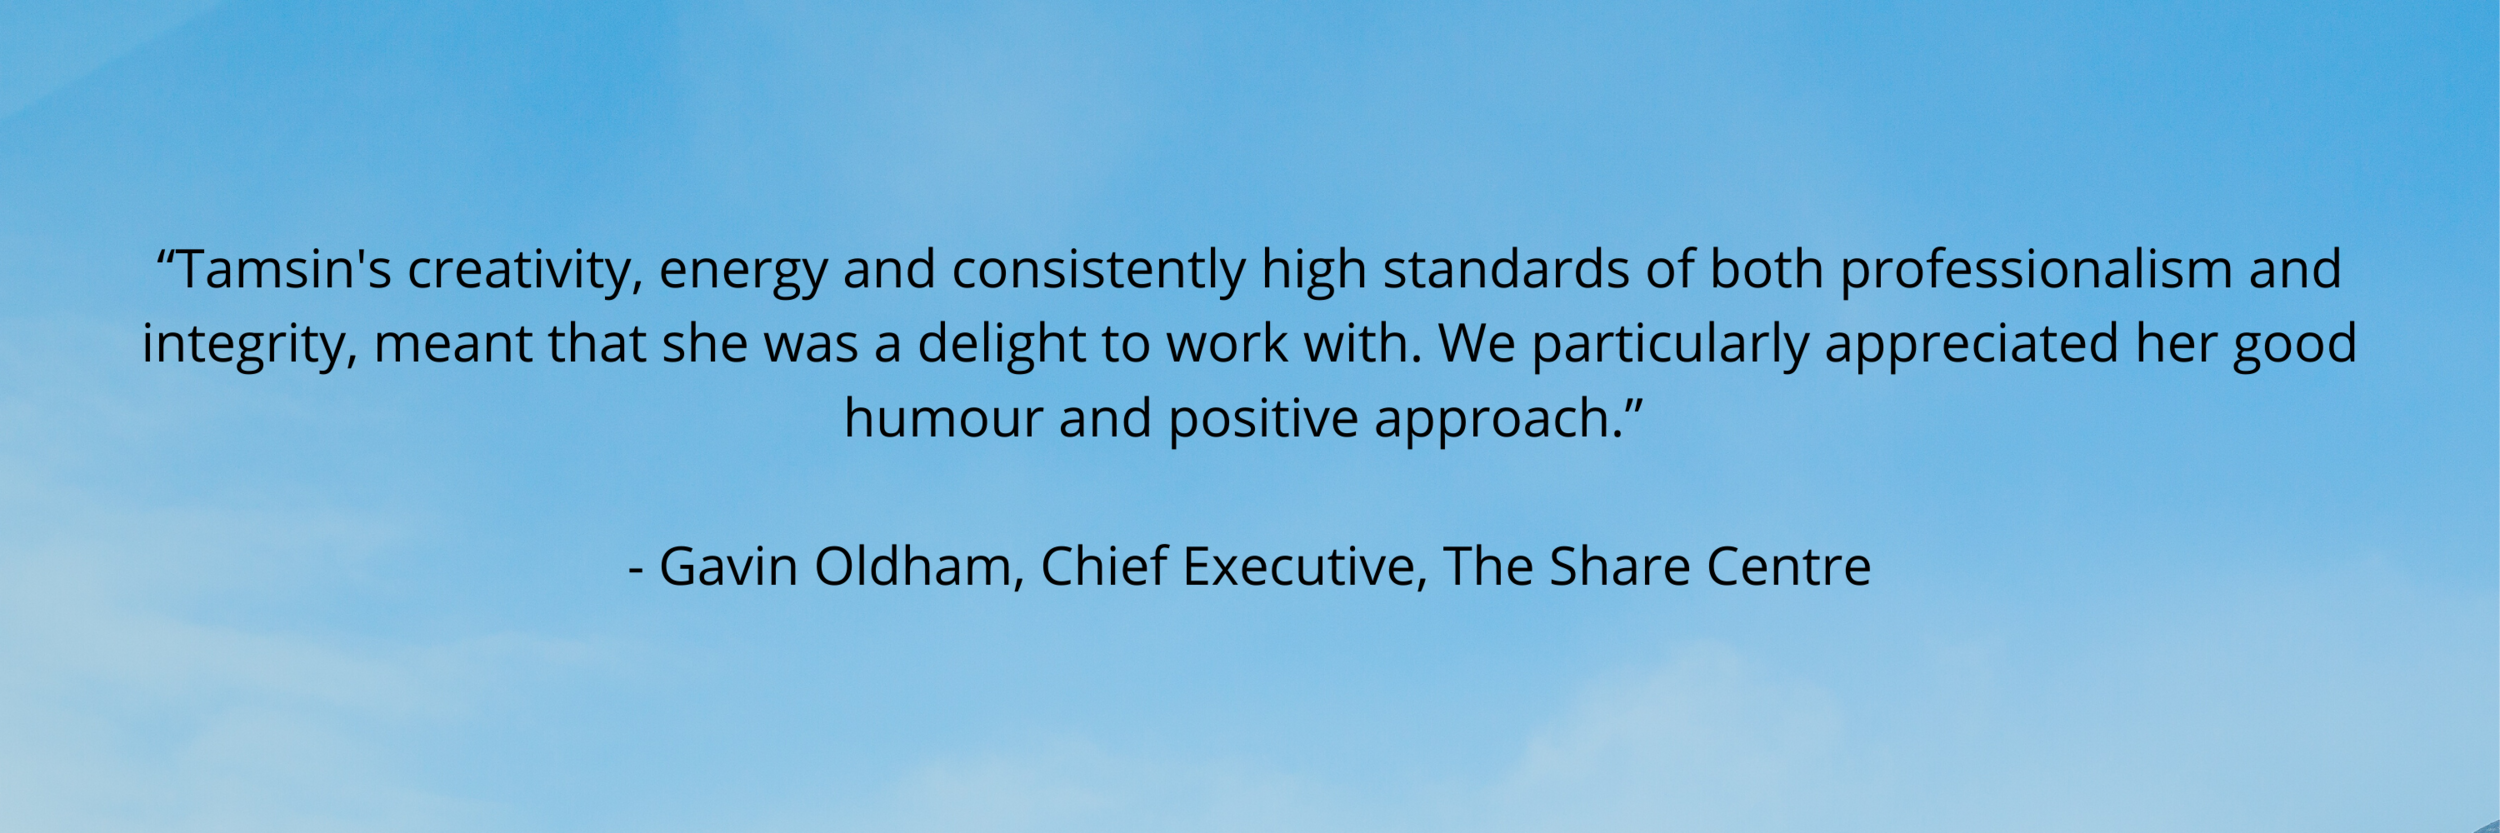 - Gavin Oldham, Chief Executive, The Share Centre.png